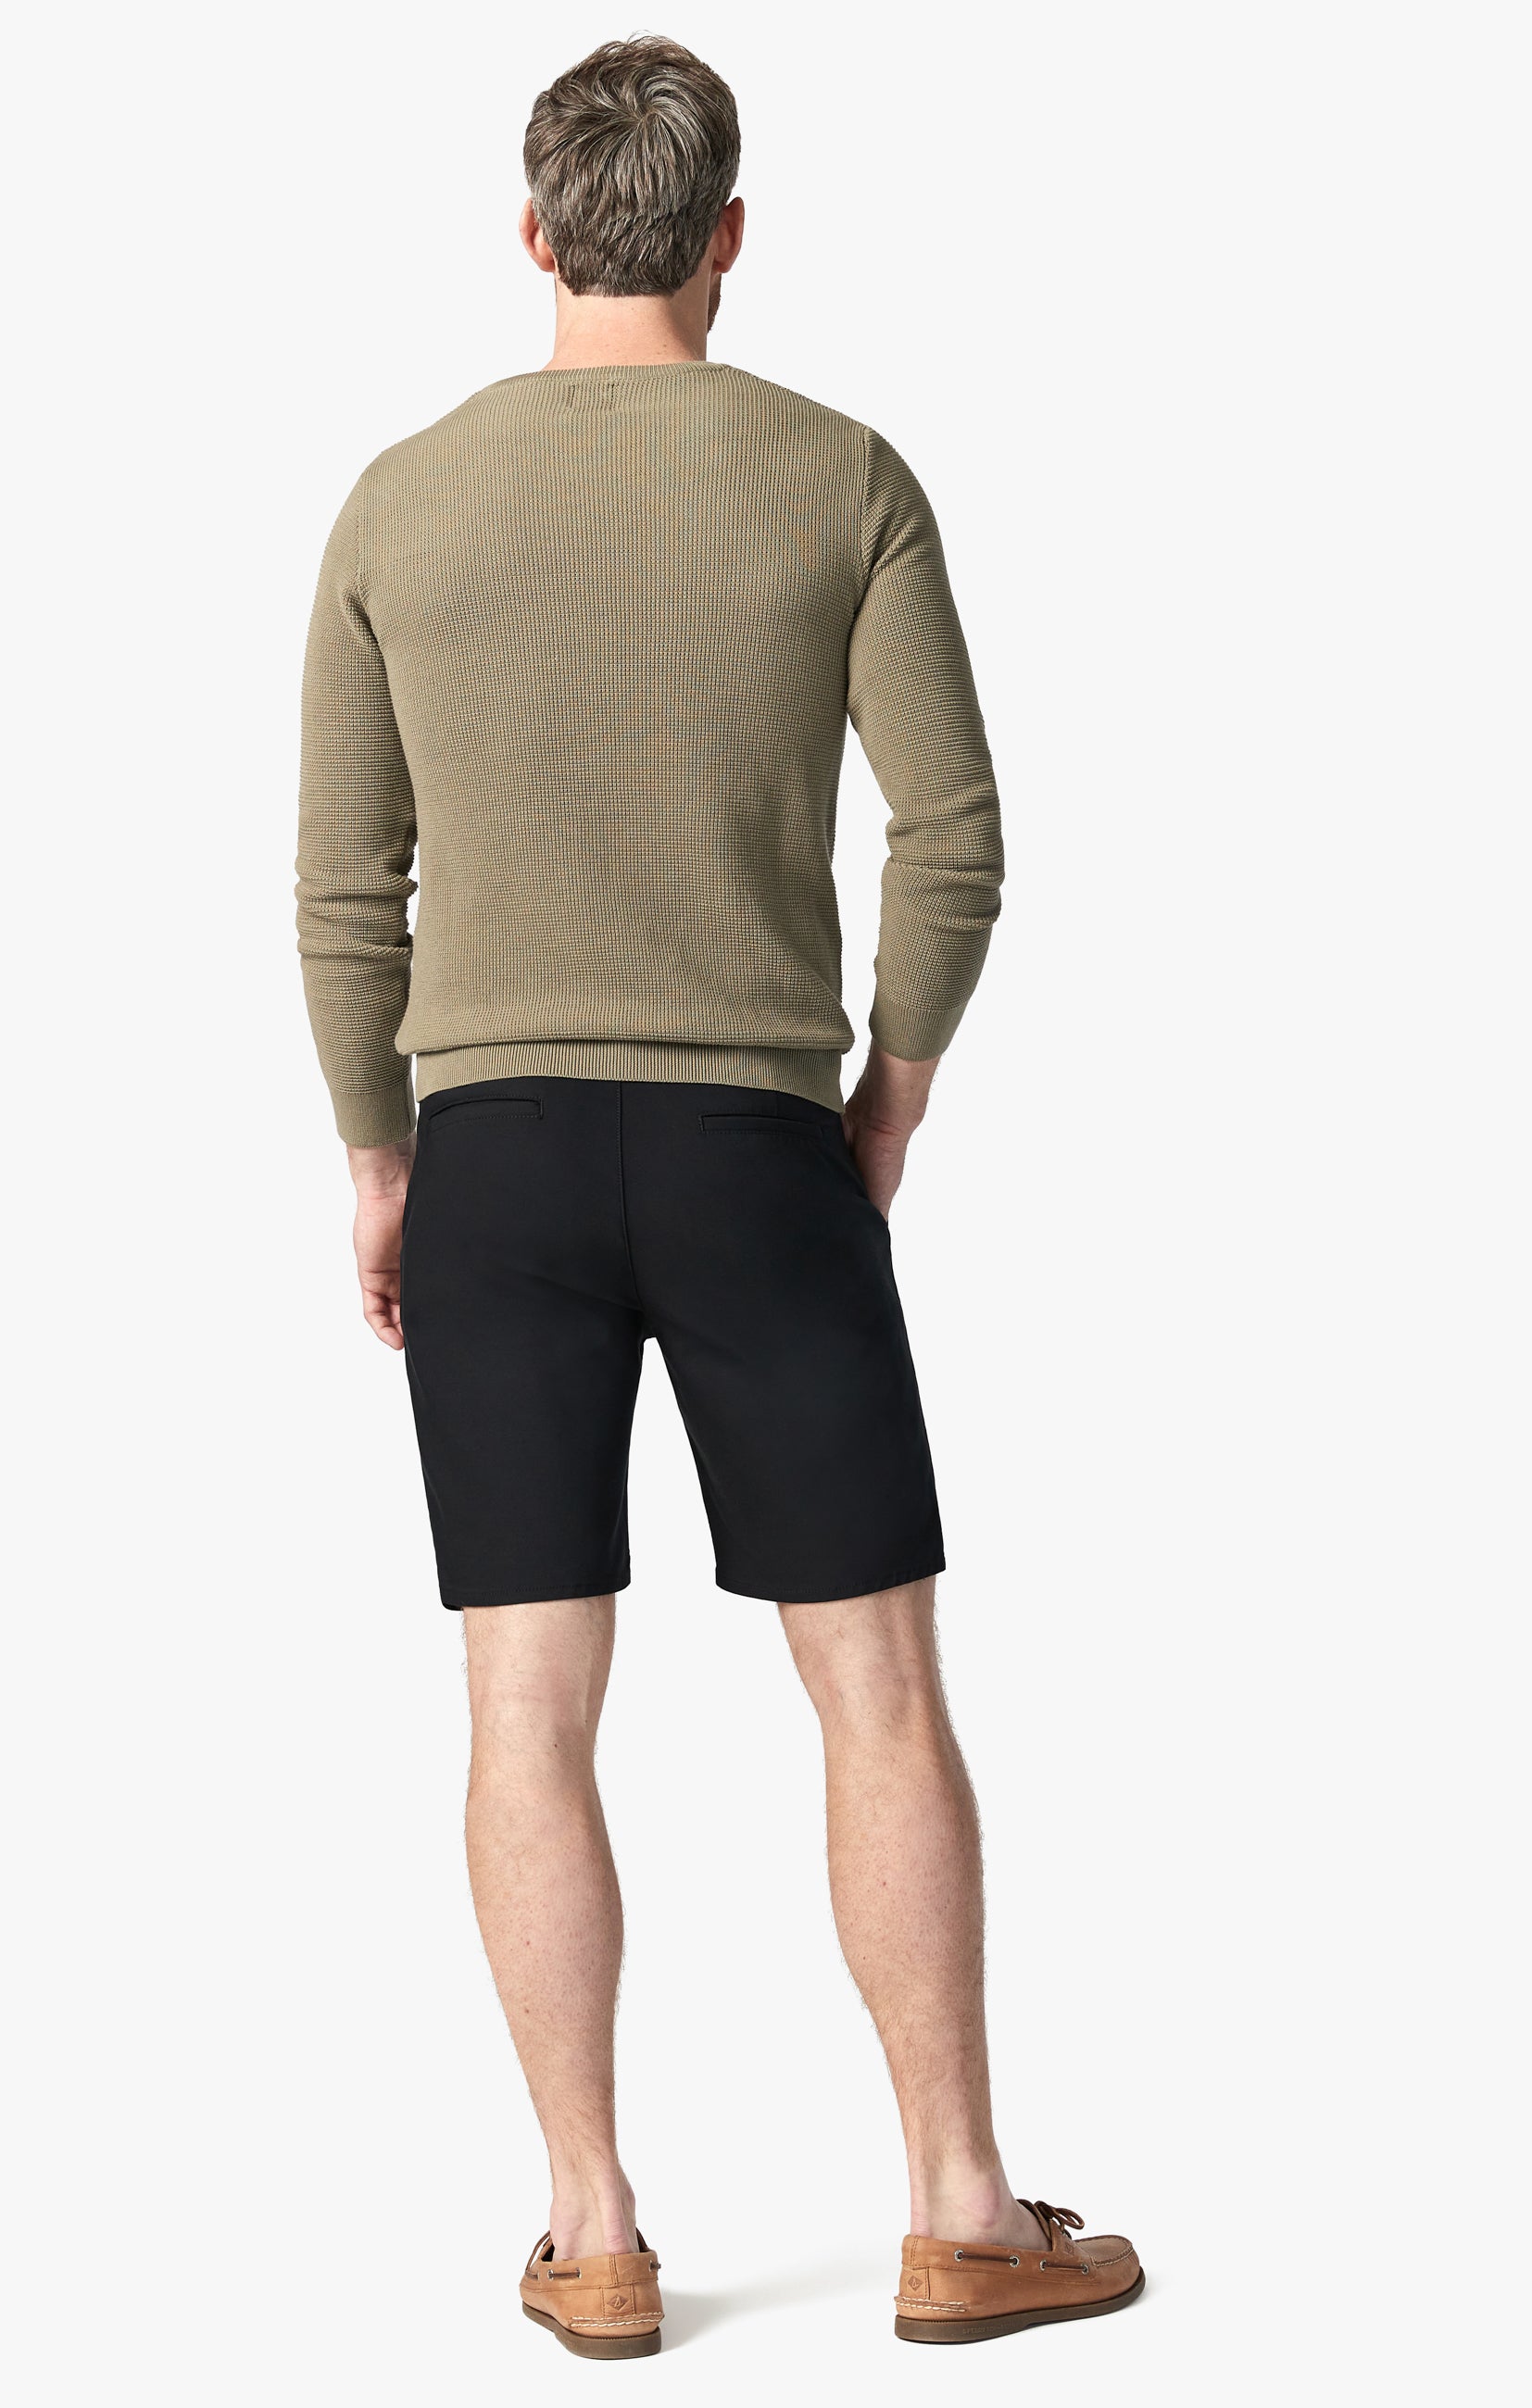 Como Shorts in Onyx Commuter Image 3